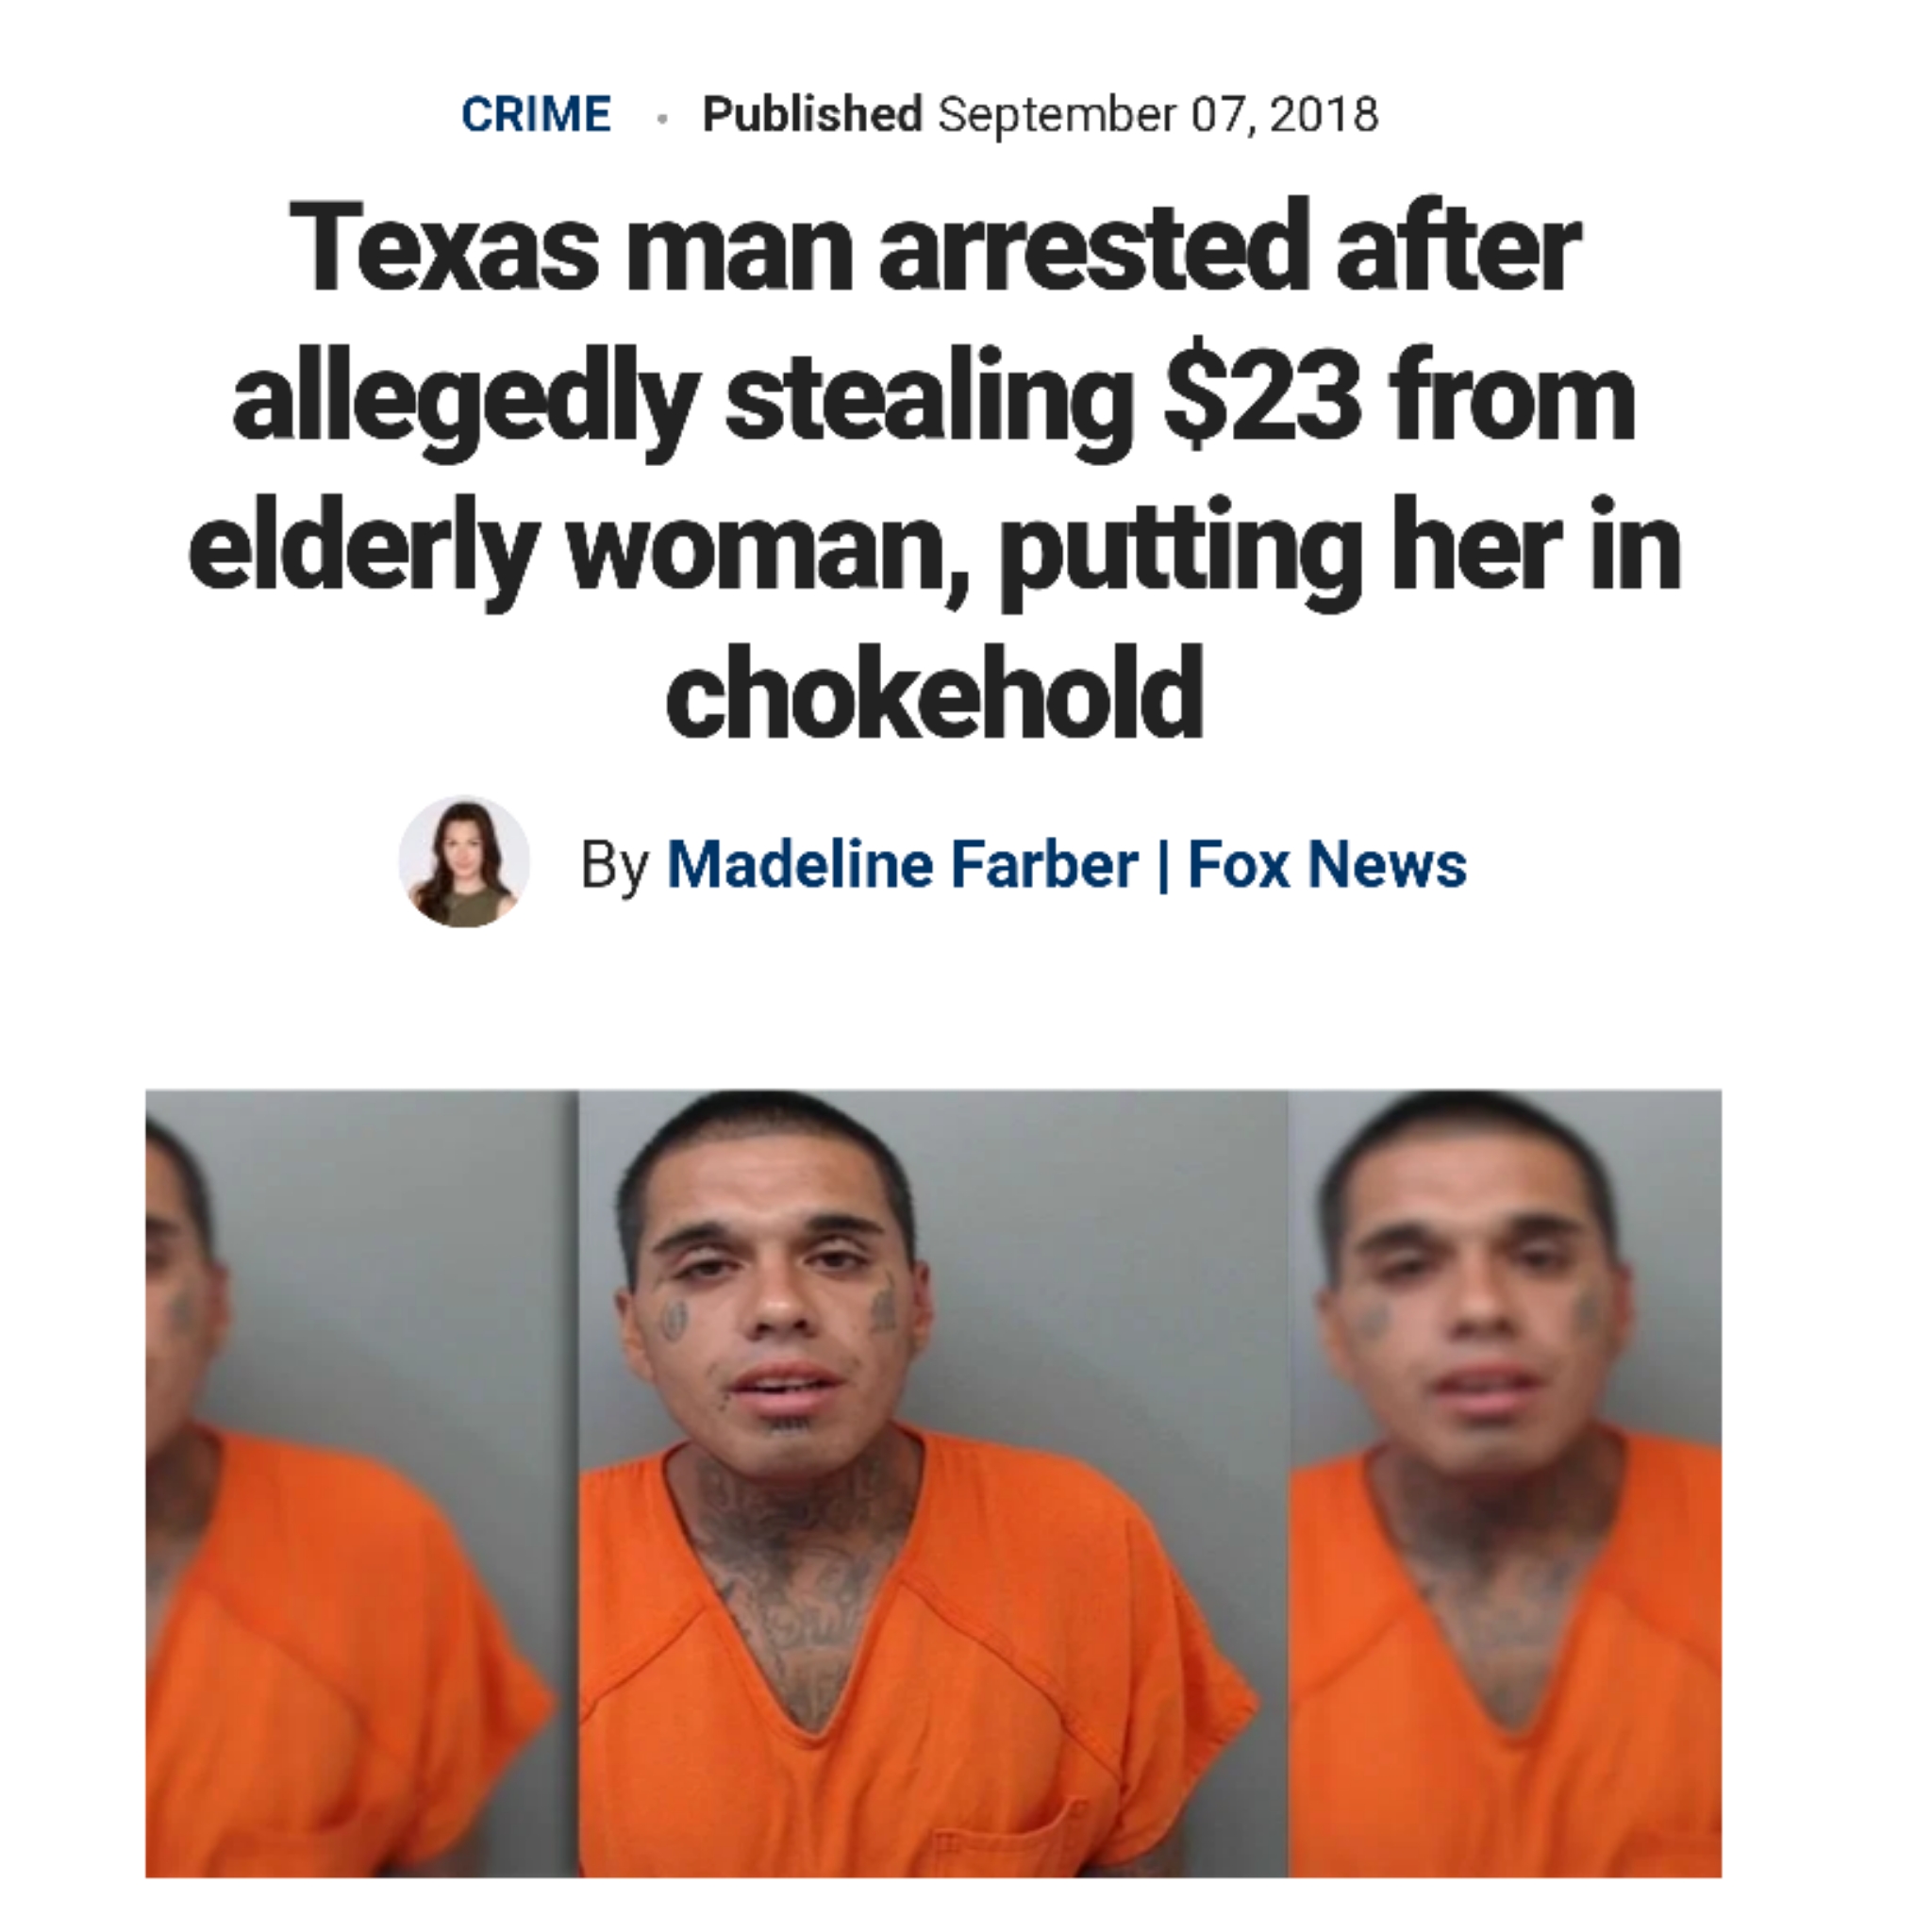 conversation - Crime Published Texas man arrested after allegedly stealing $23 from elderly woman, putting her in chokehold By Madeline Farber | Fox News